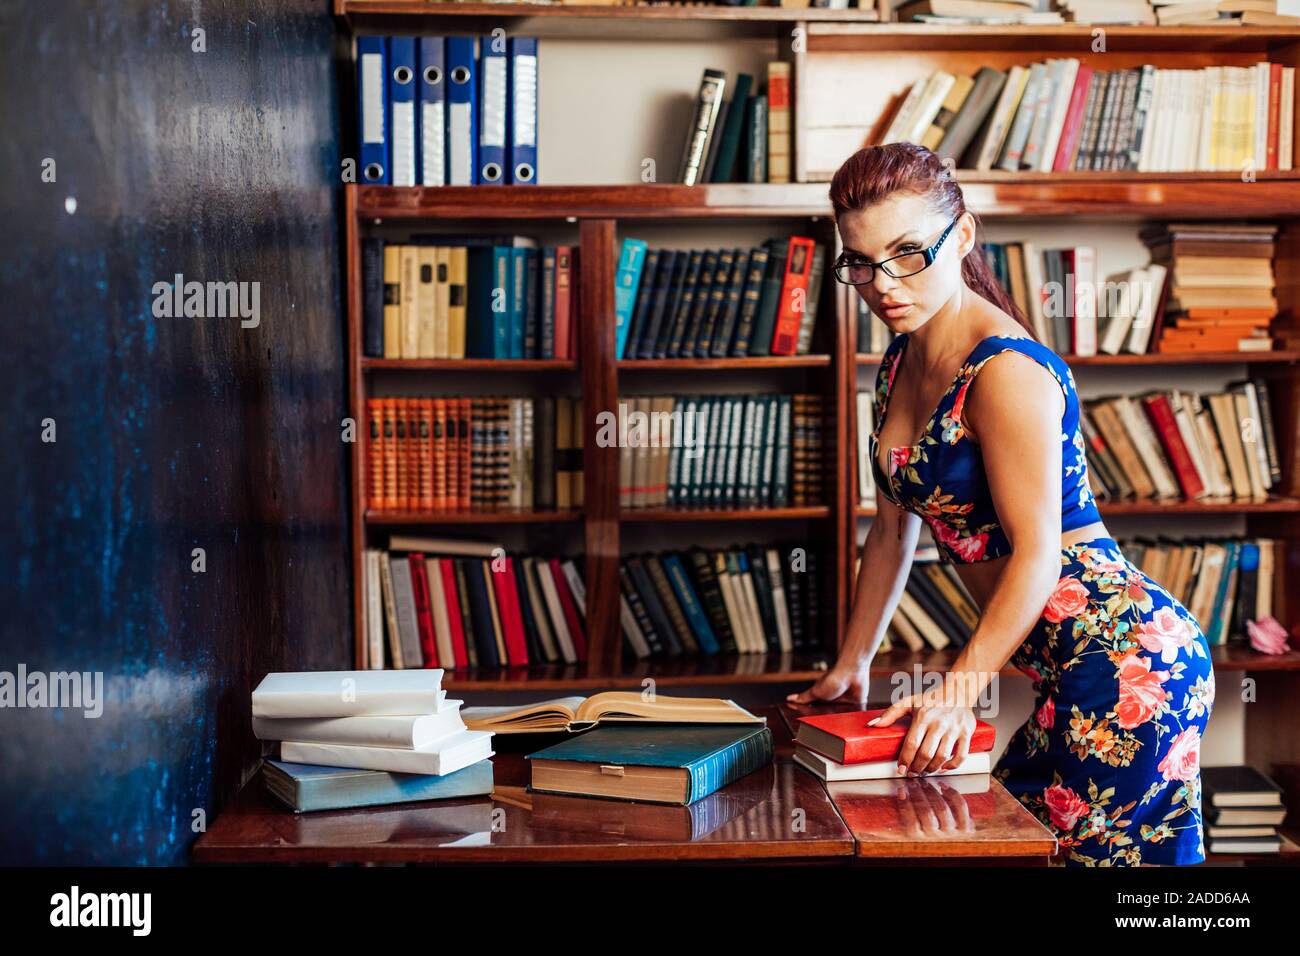 a woman sits at a desk book librarian education Stock Photo